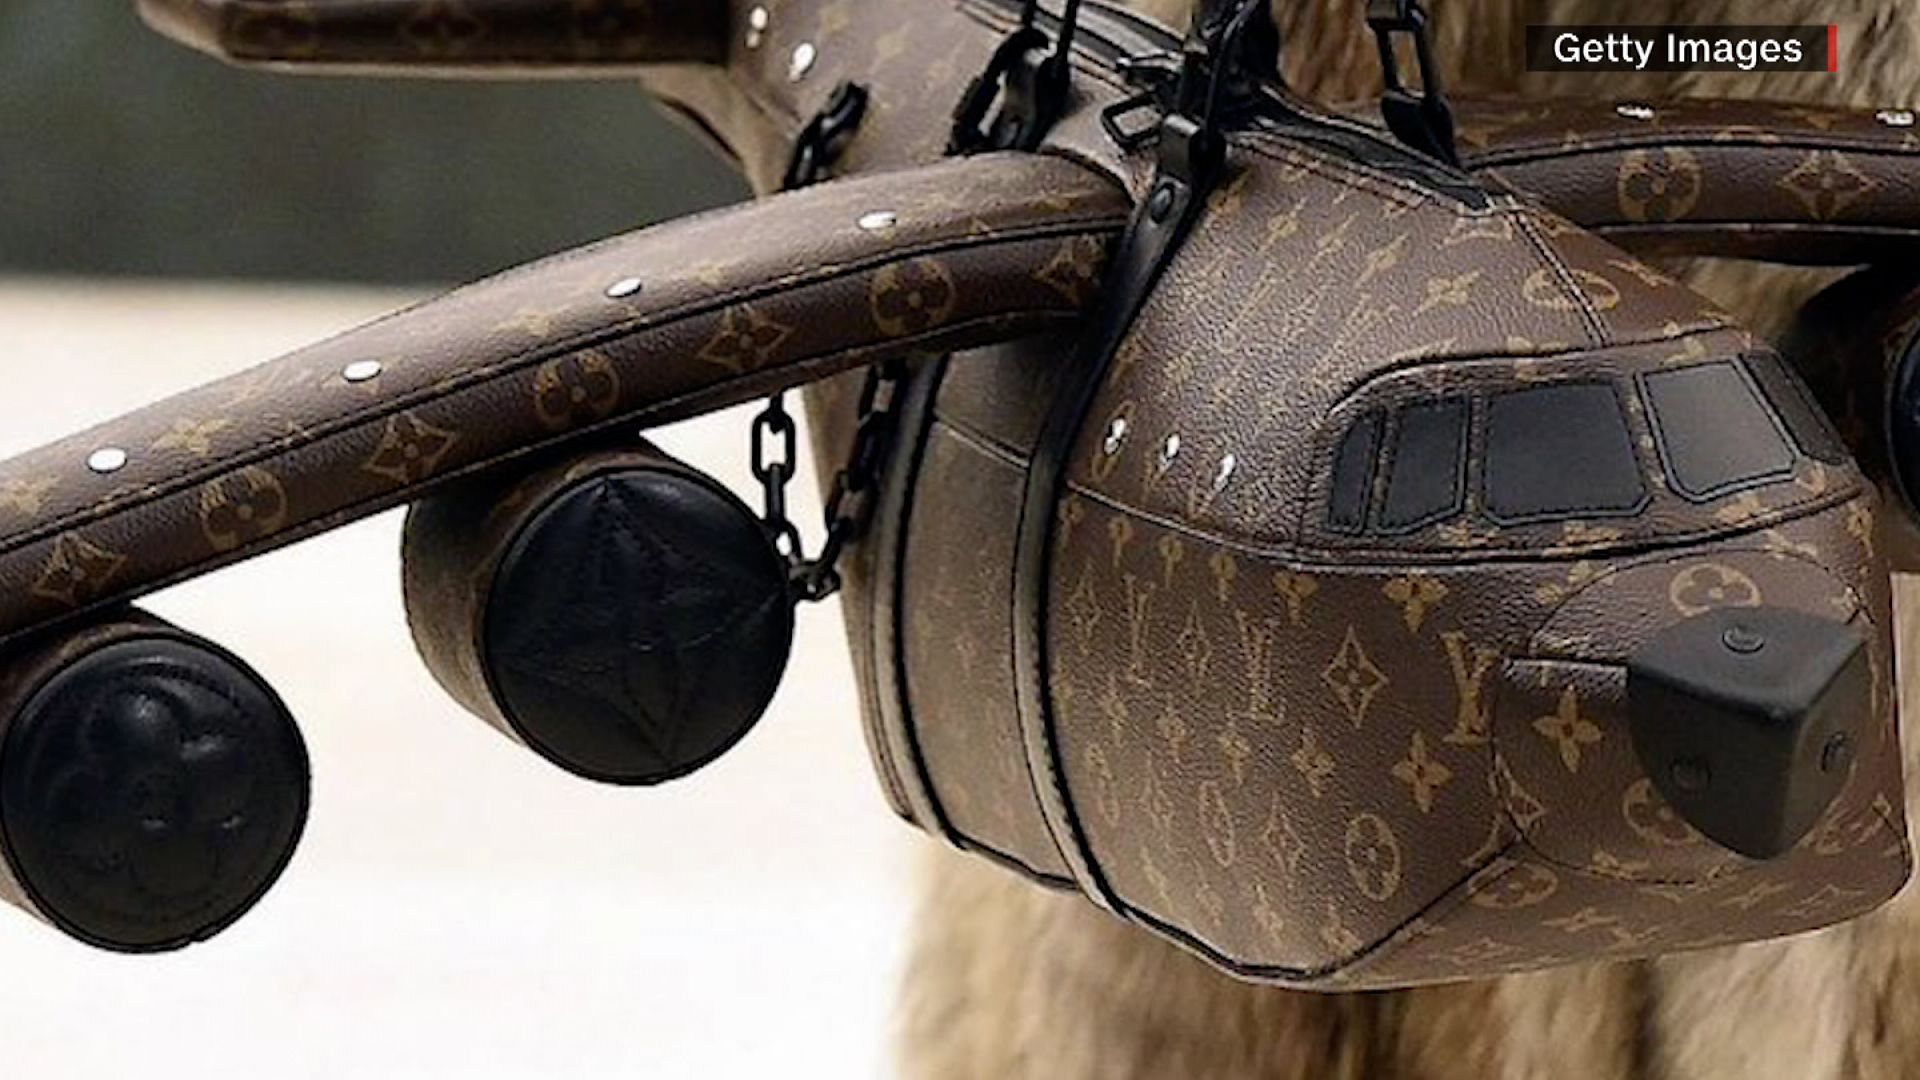 This Louis Vuitton airplane bag could be more expensive than your